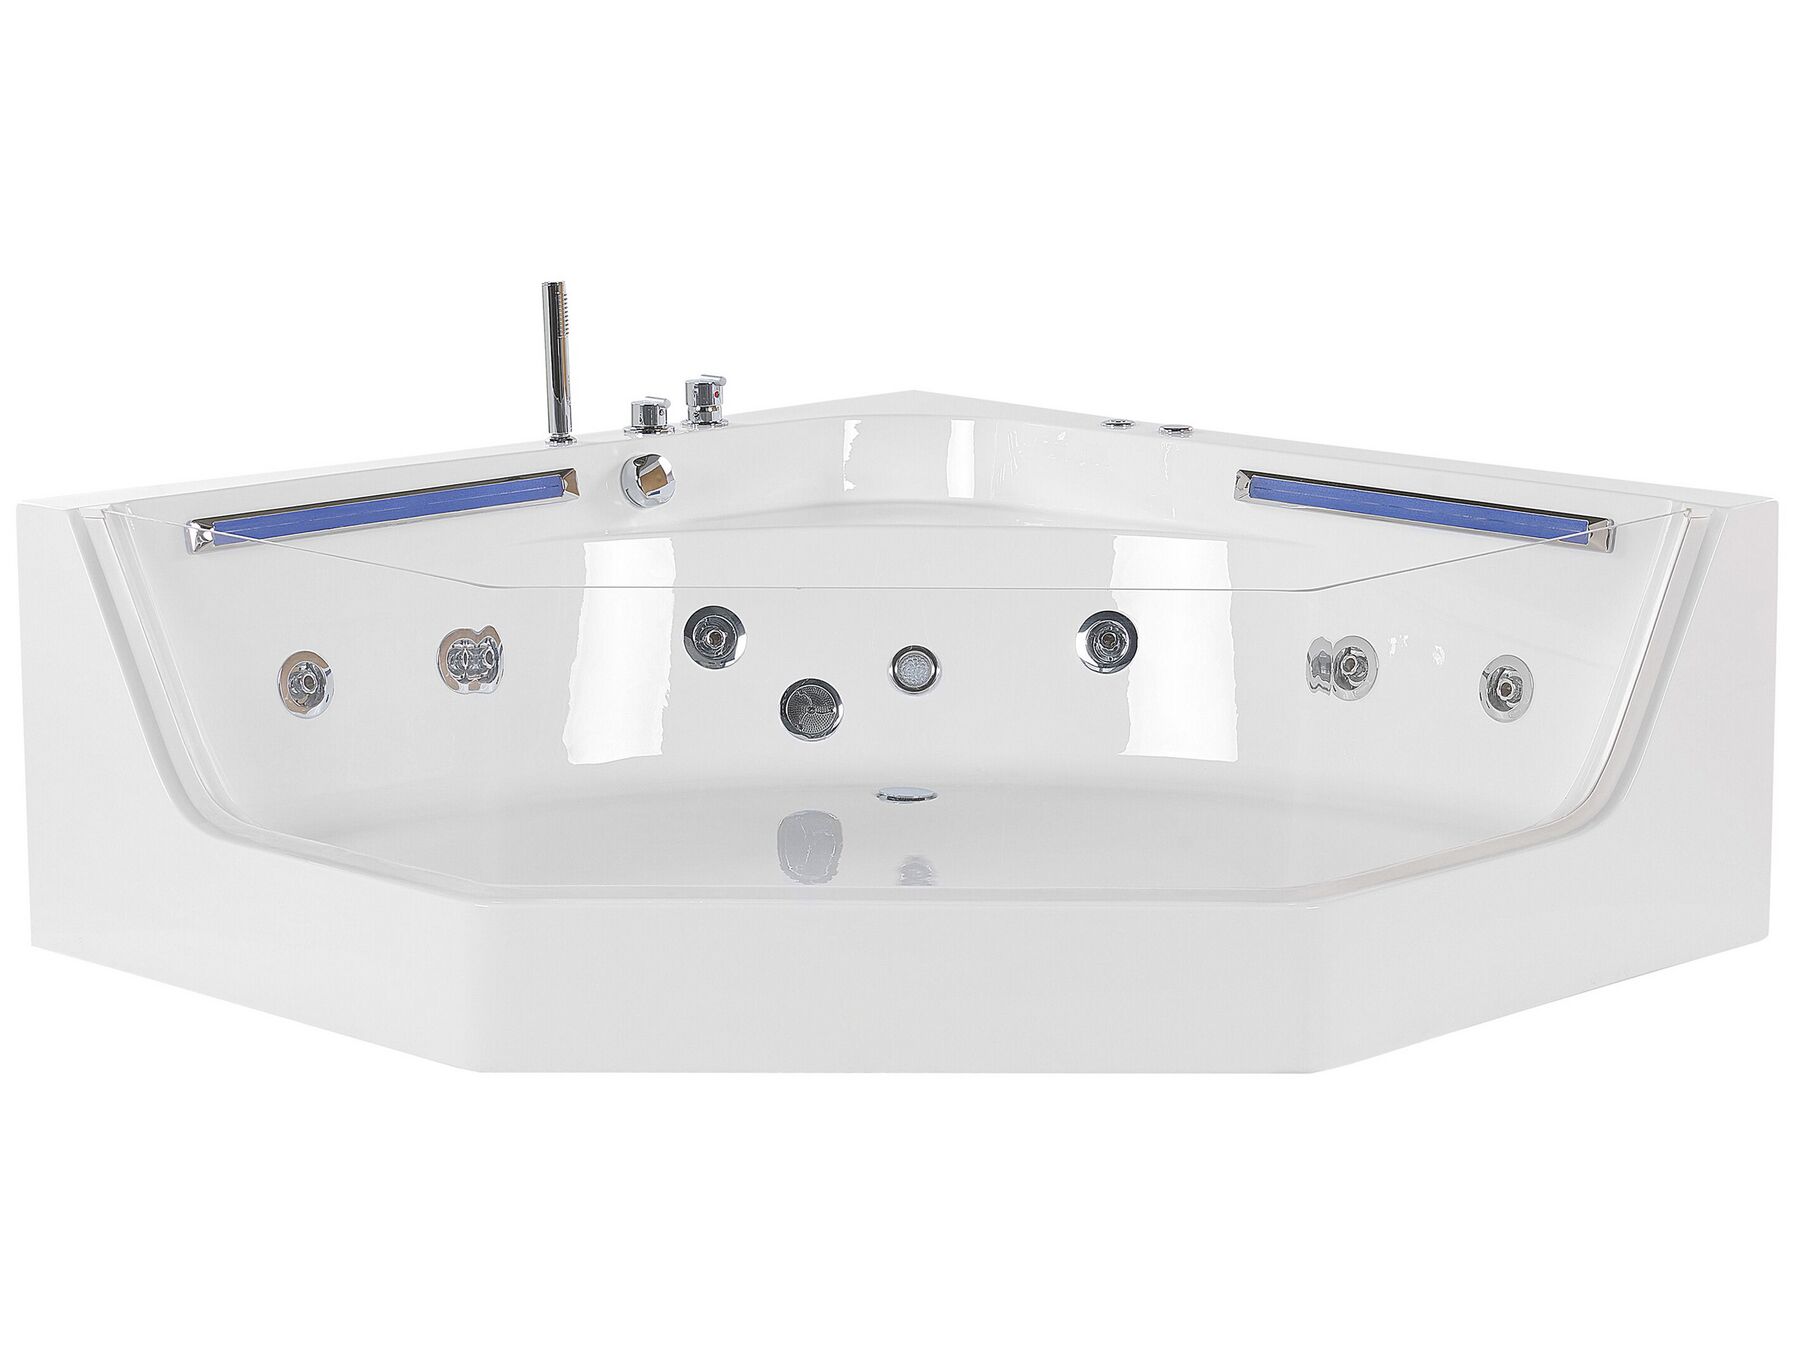 Whirlpool Bath with LED 2110 x 1500 mm White CACERES_786827